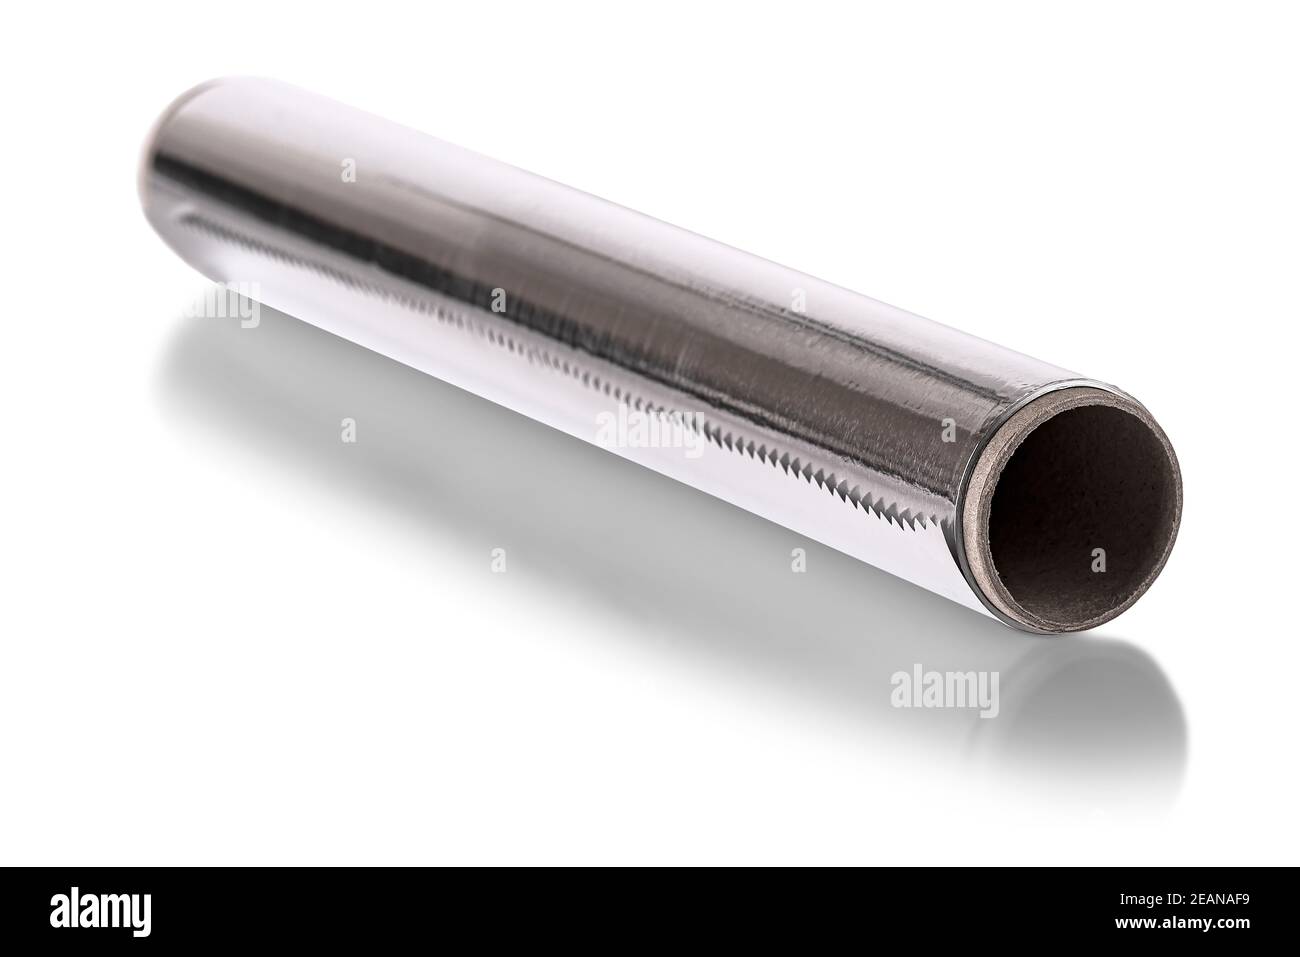 A Silver aluminium foil roll isolated on the white background. The foil is extremely pliable and can be bent or wrapped around objects with ease. Stock Photo